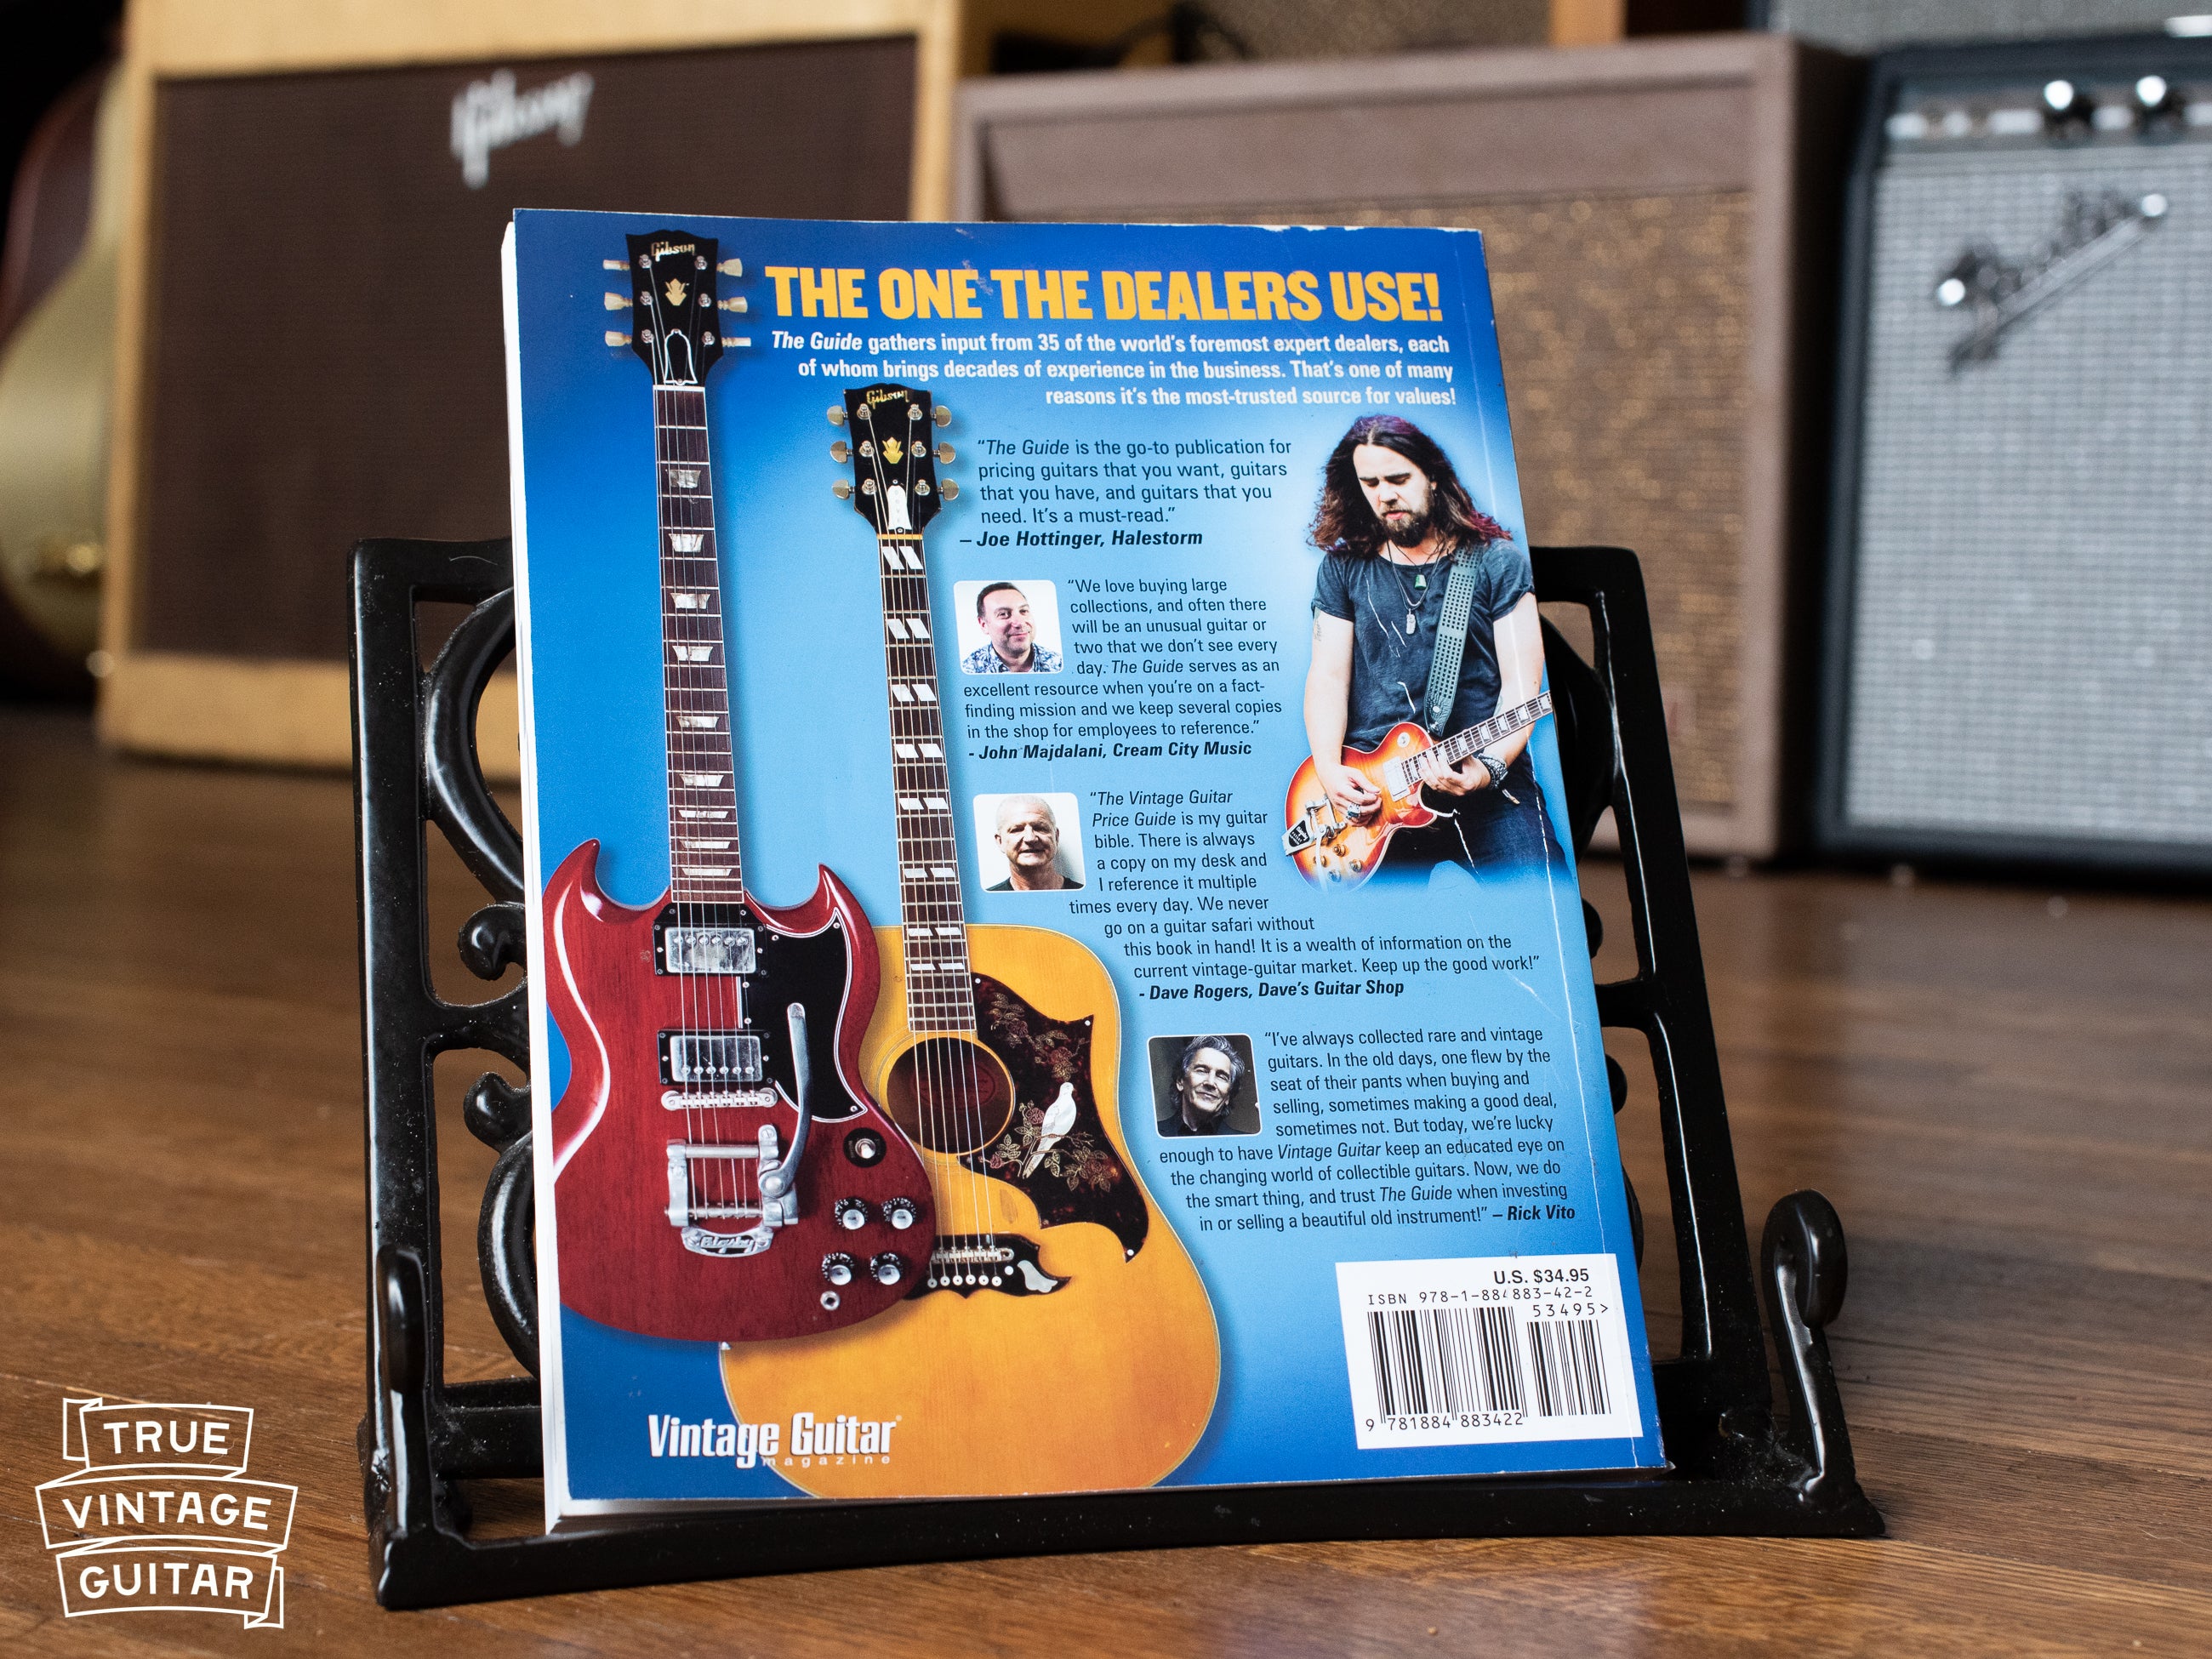 Vintage Guitar Values In The 2020 Vintage Guitar Price Guide